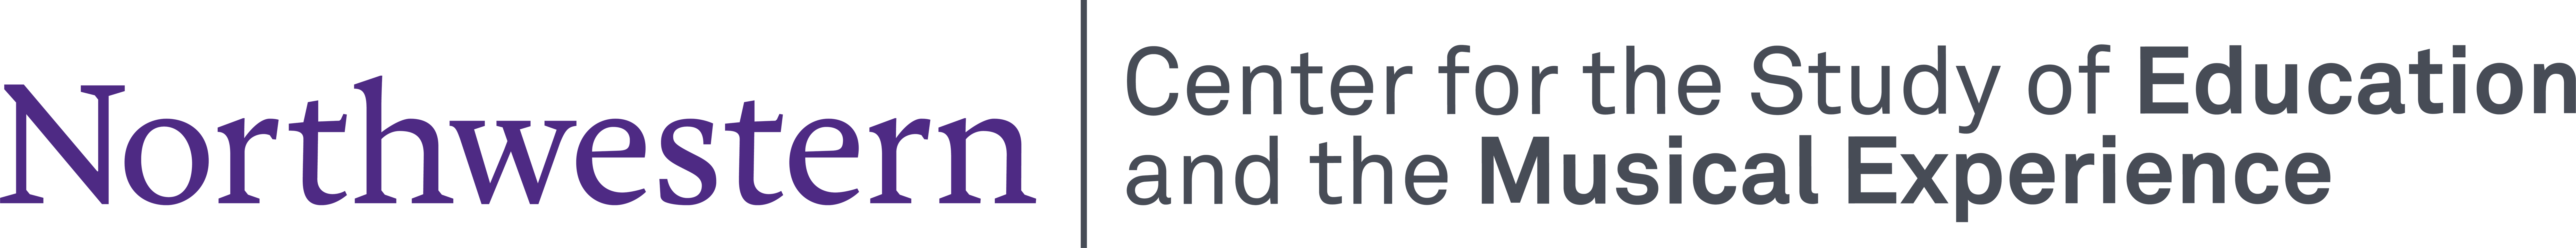 CSEME: Center for the Study of Education and the Musical Experience